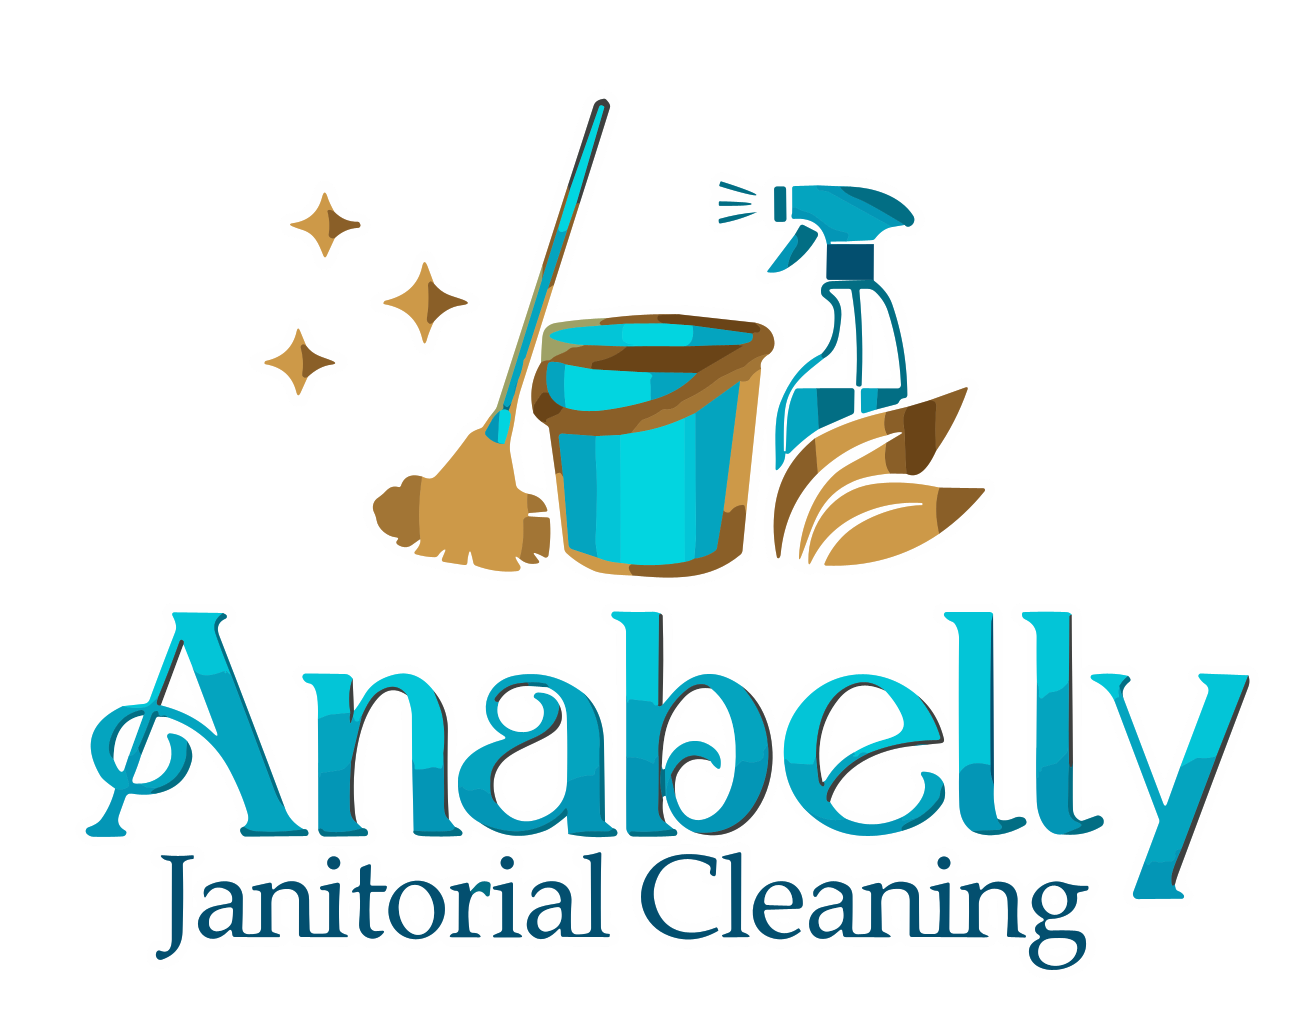 Anabelly Janitorial Cleaning offers services of Residential Cleaning, Deep Cleaning, Move Out - In, Airbnb Cleaning, Post Construction Cleaning, Commercial Cleaning, Office Cleaning, Apartment Cleaning in San Jose, Santa Clara, Los Altos, Mountain View, Palo Alto, Melopark, Redwood City, San Carlos, Belmont, San Mateo, San Bruno, Deyli City, San Francisco, Heyward, San Leandro, Cupertino, Half Moon, Bay Hillsborough - Residential Cleaning